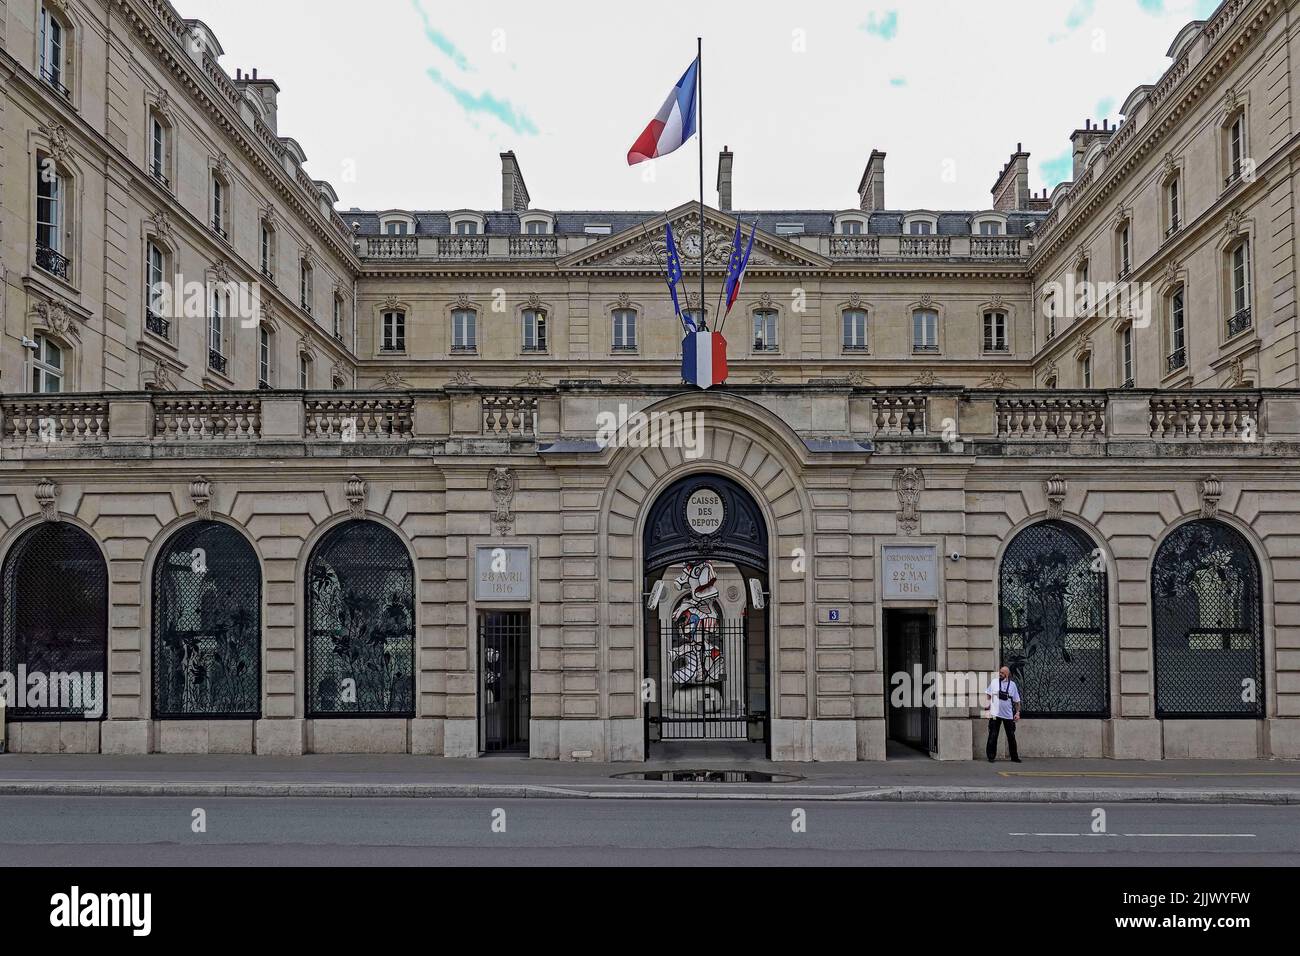 France, Paris, Caisse des Depots et Consignations (Deposits and Consignments Fund) is a French public sector financial institution created in 1816, an Stock Photo